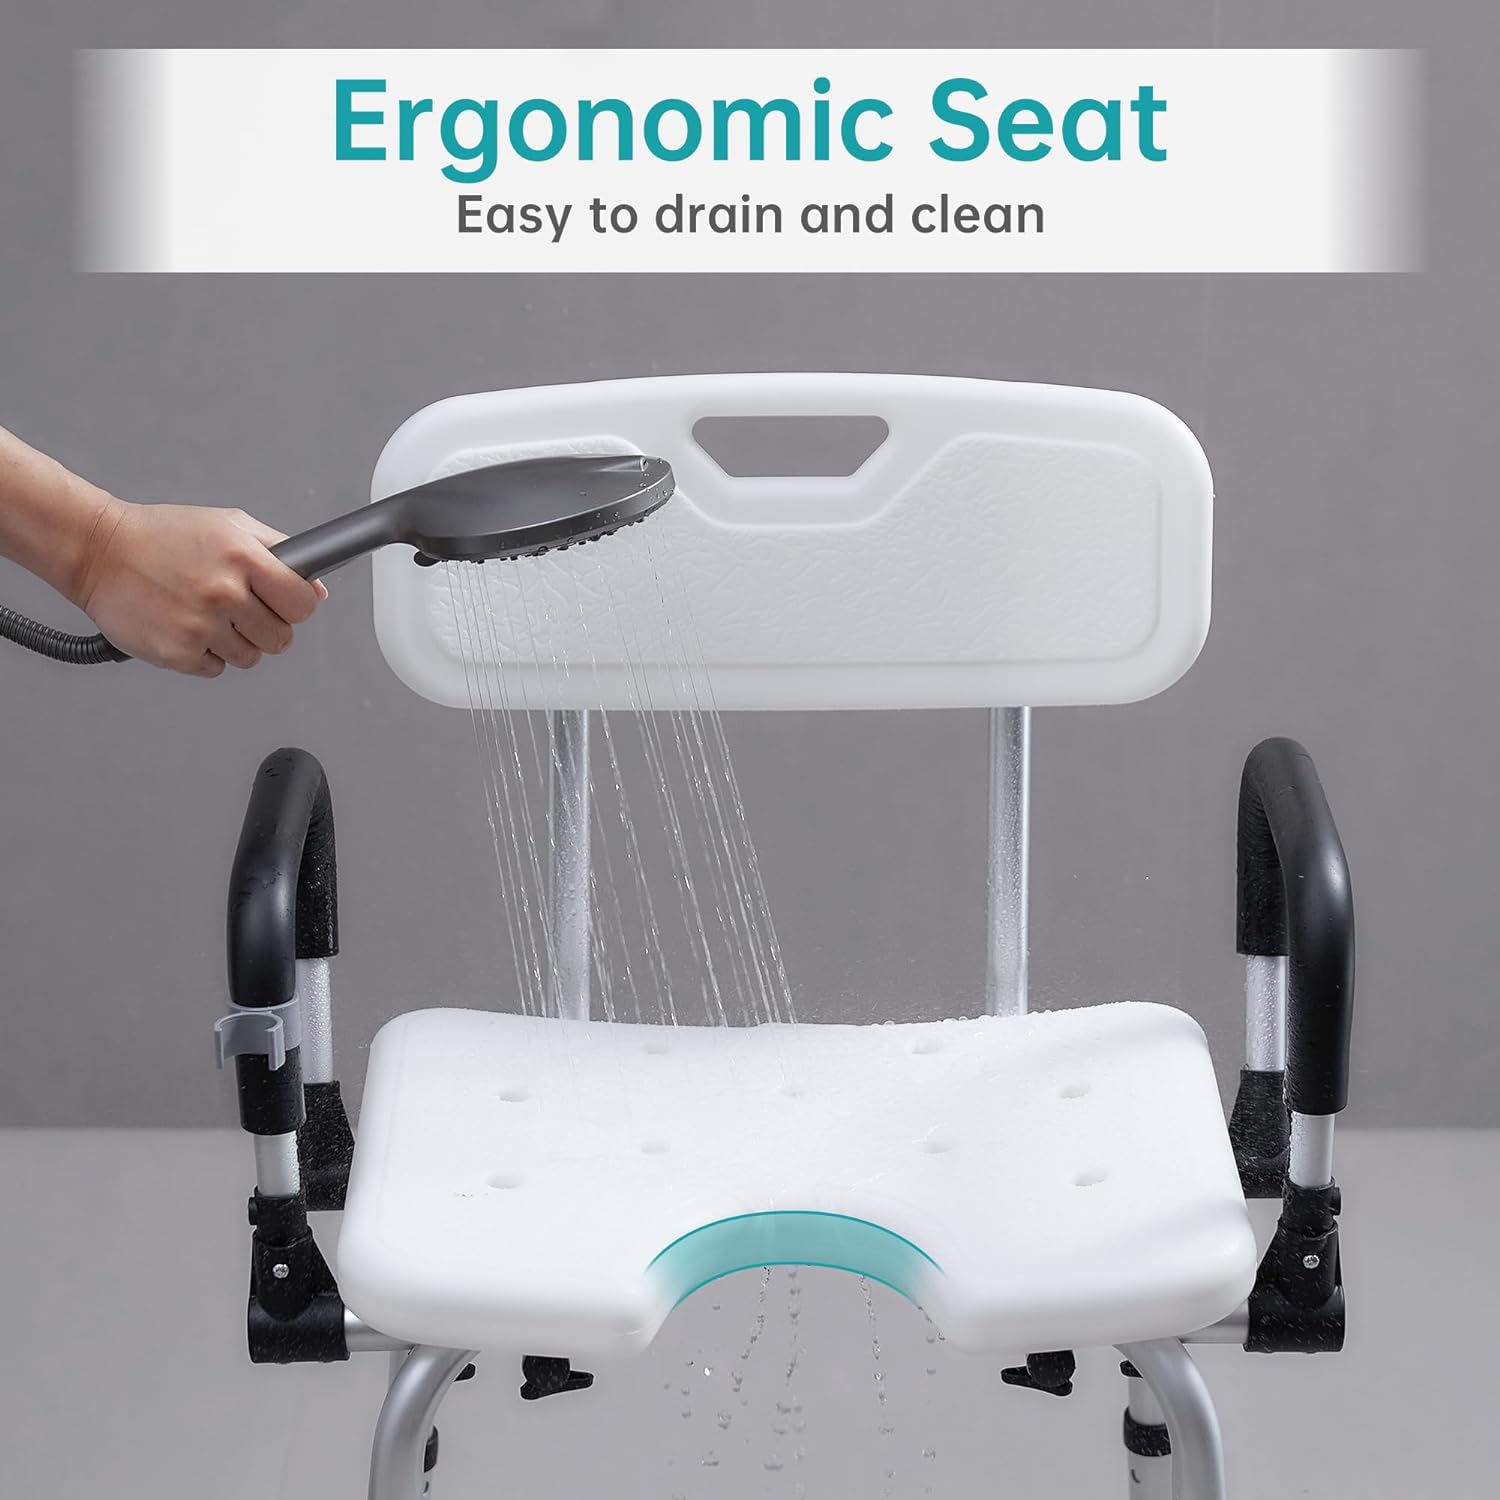 ELENKER Shower Chair with Cutout Seat, Medical Shower Seat Bath